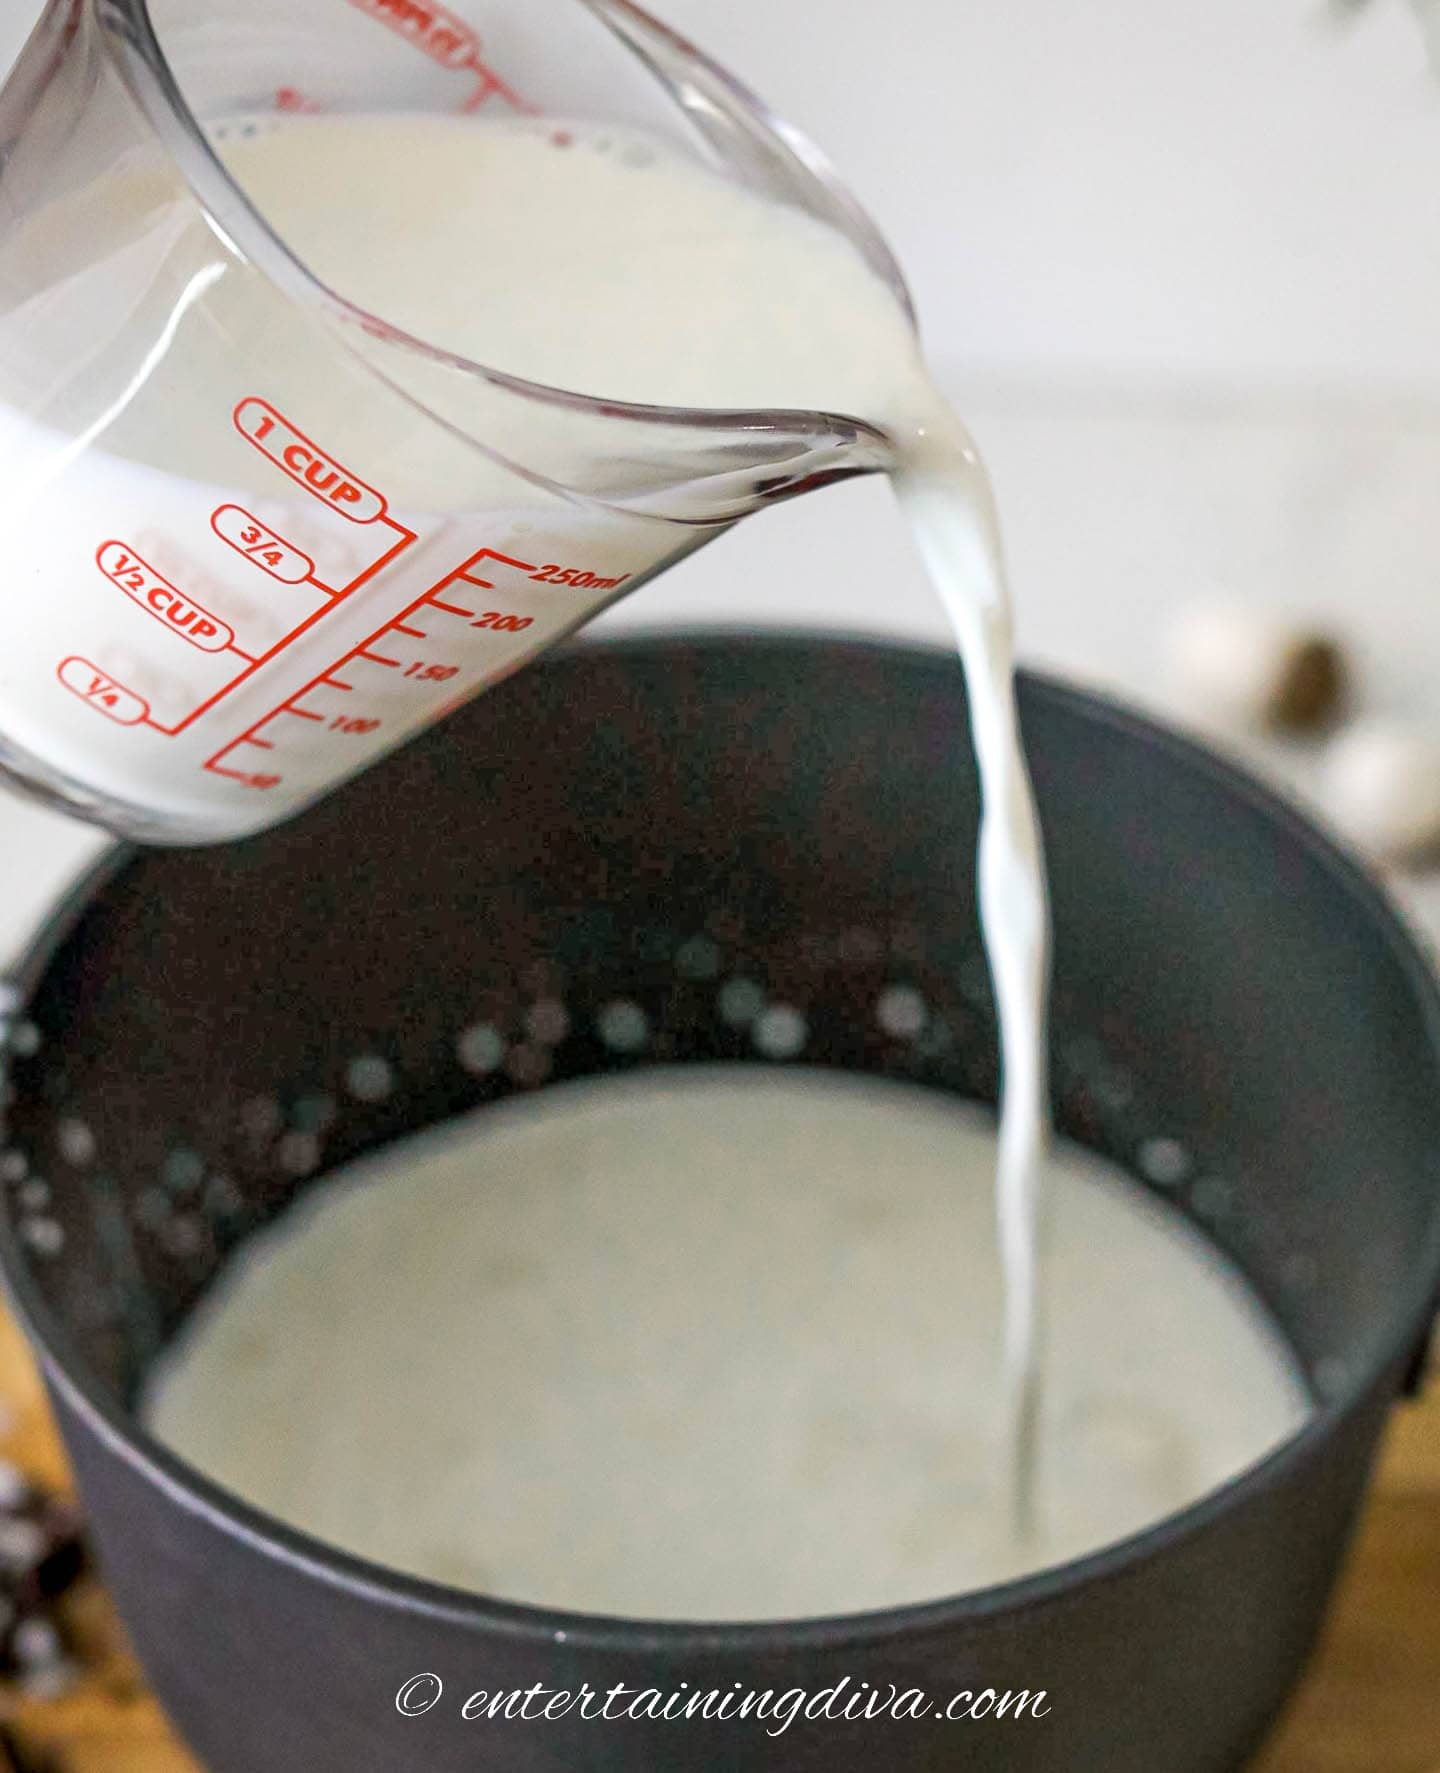 Milk being poured into a sauce pan